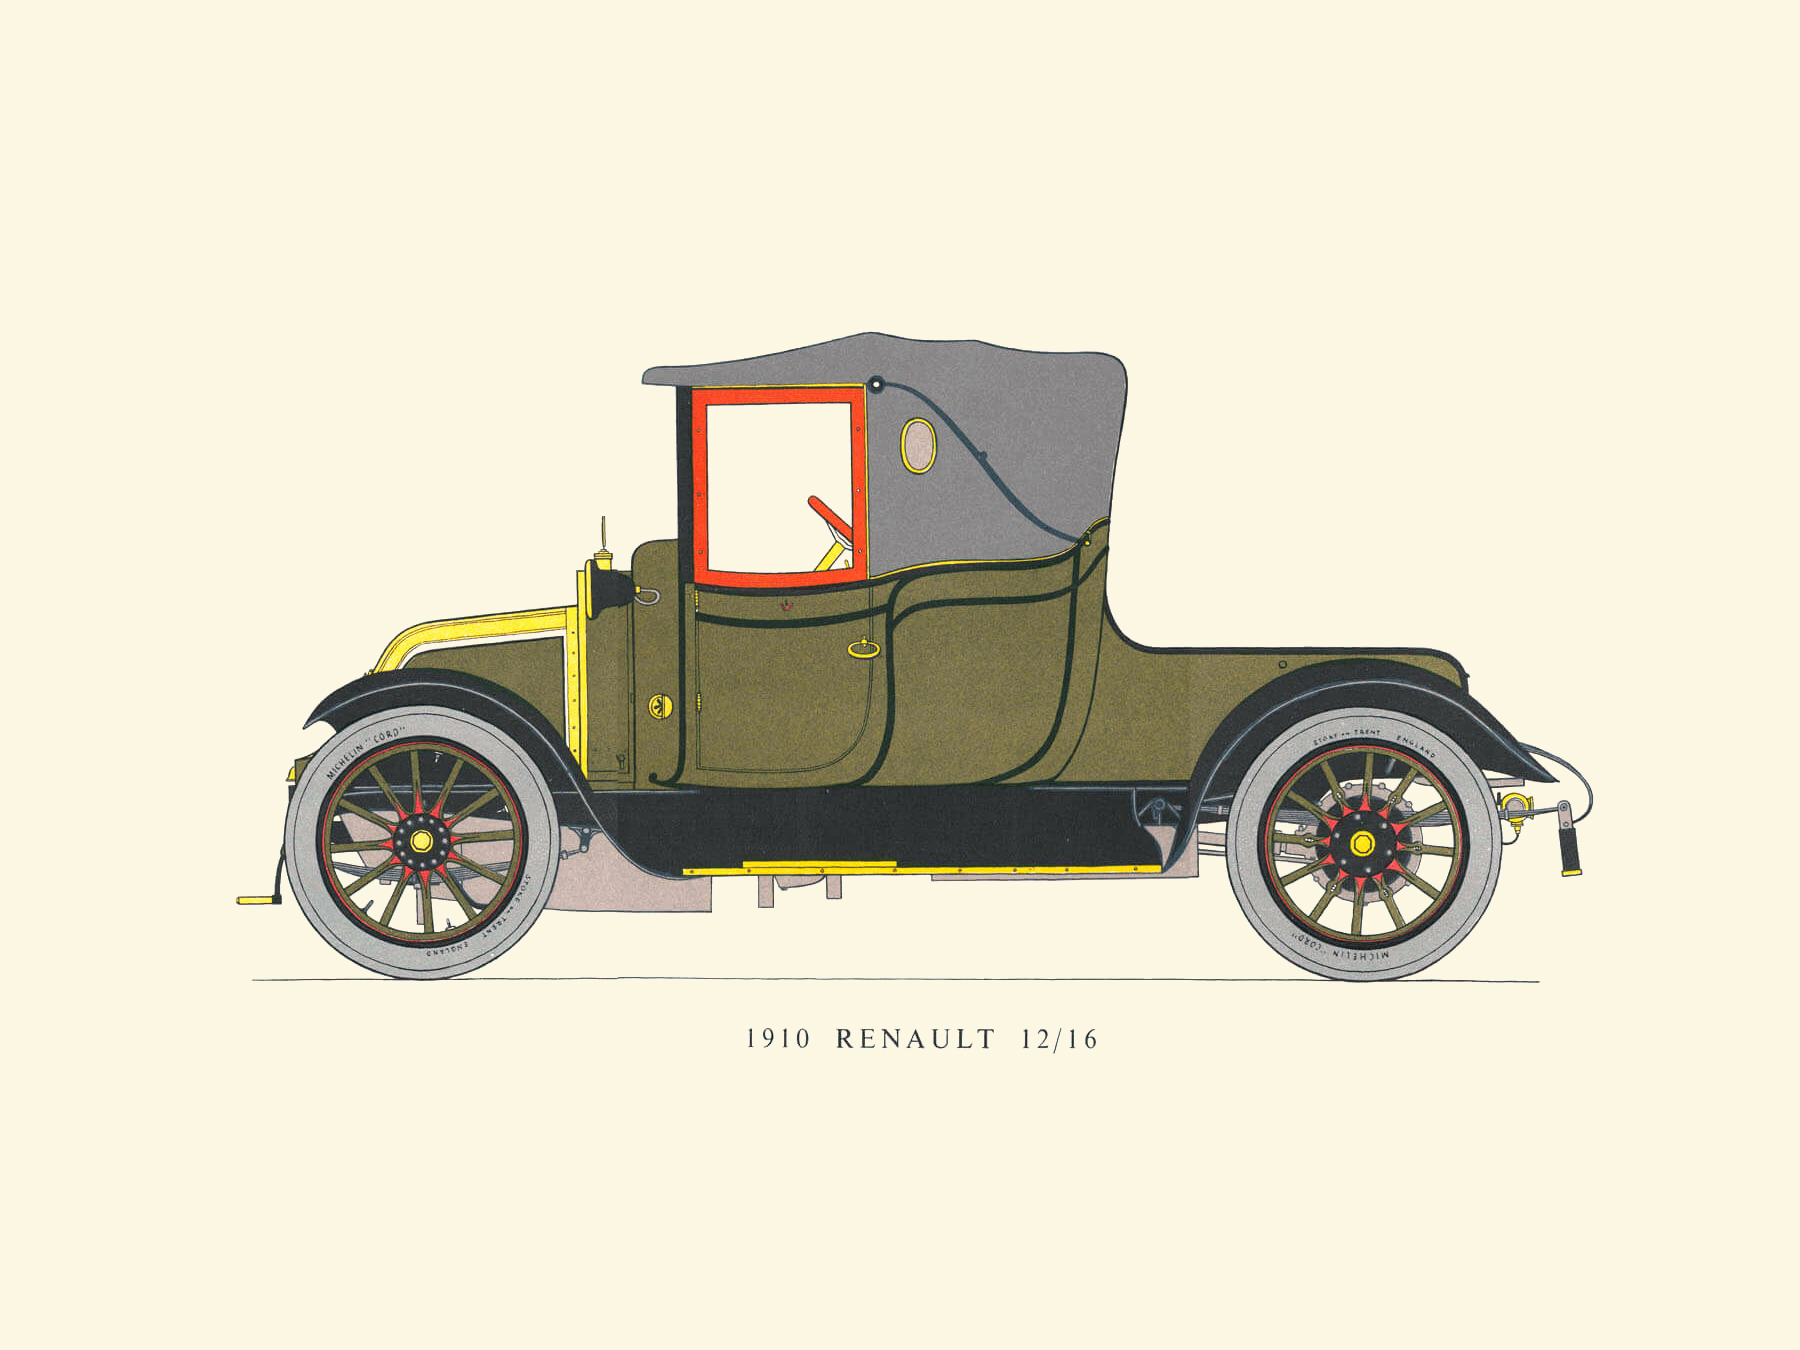 1910 Renault 12/16 Coupé body by Cann Limited, London, England: Drawn by George Oliver